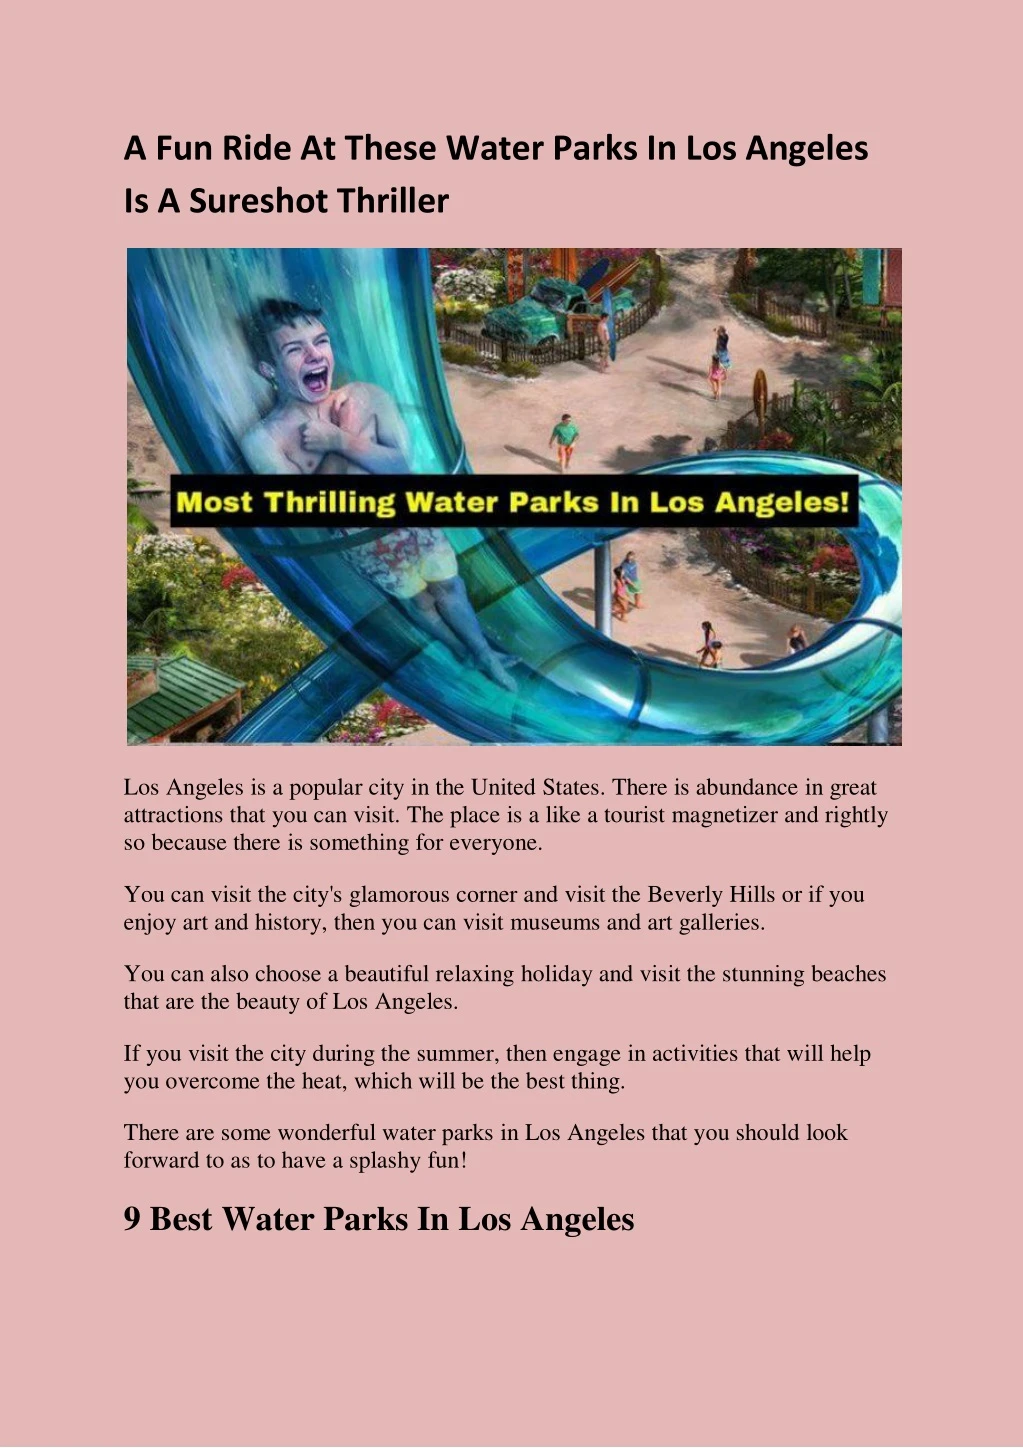 a fun ride at these water parks in los angeles